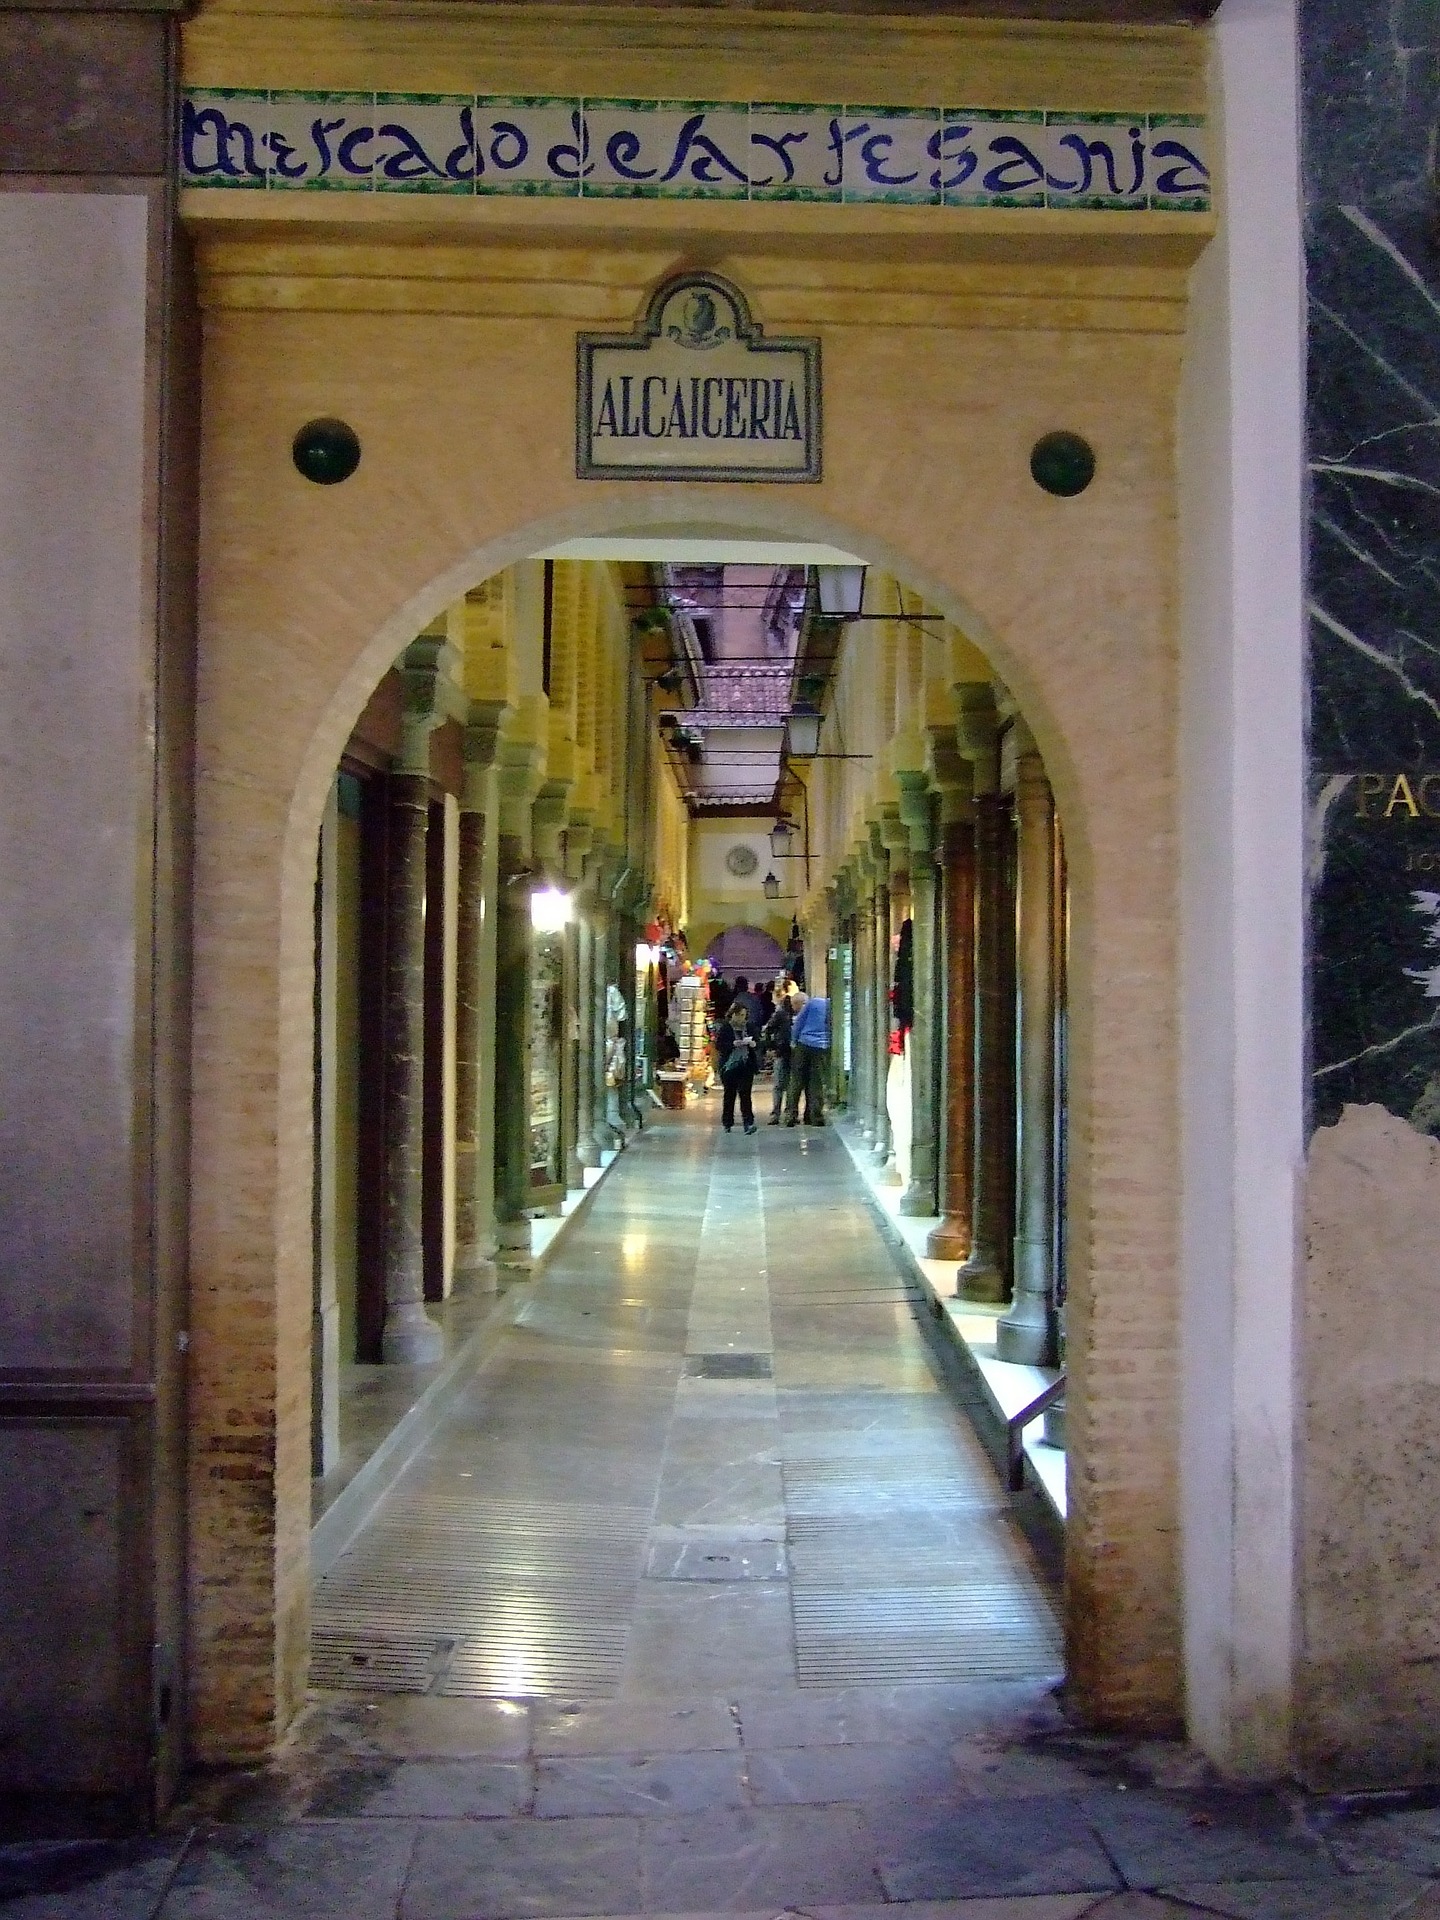 A stop at the Alcaiceria is a must when you visit Granada!